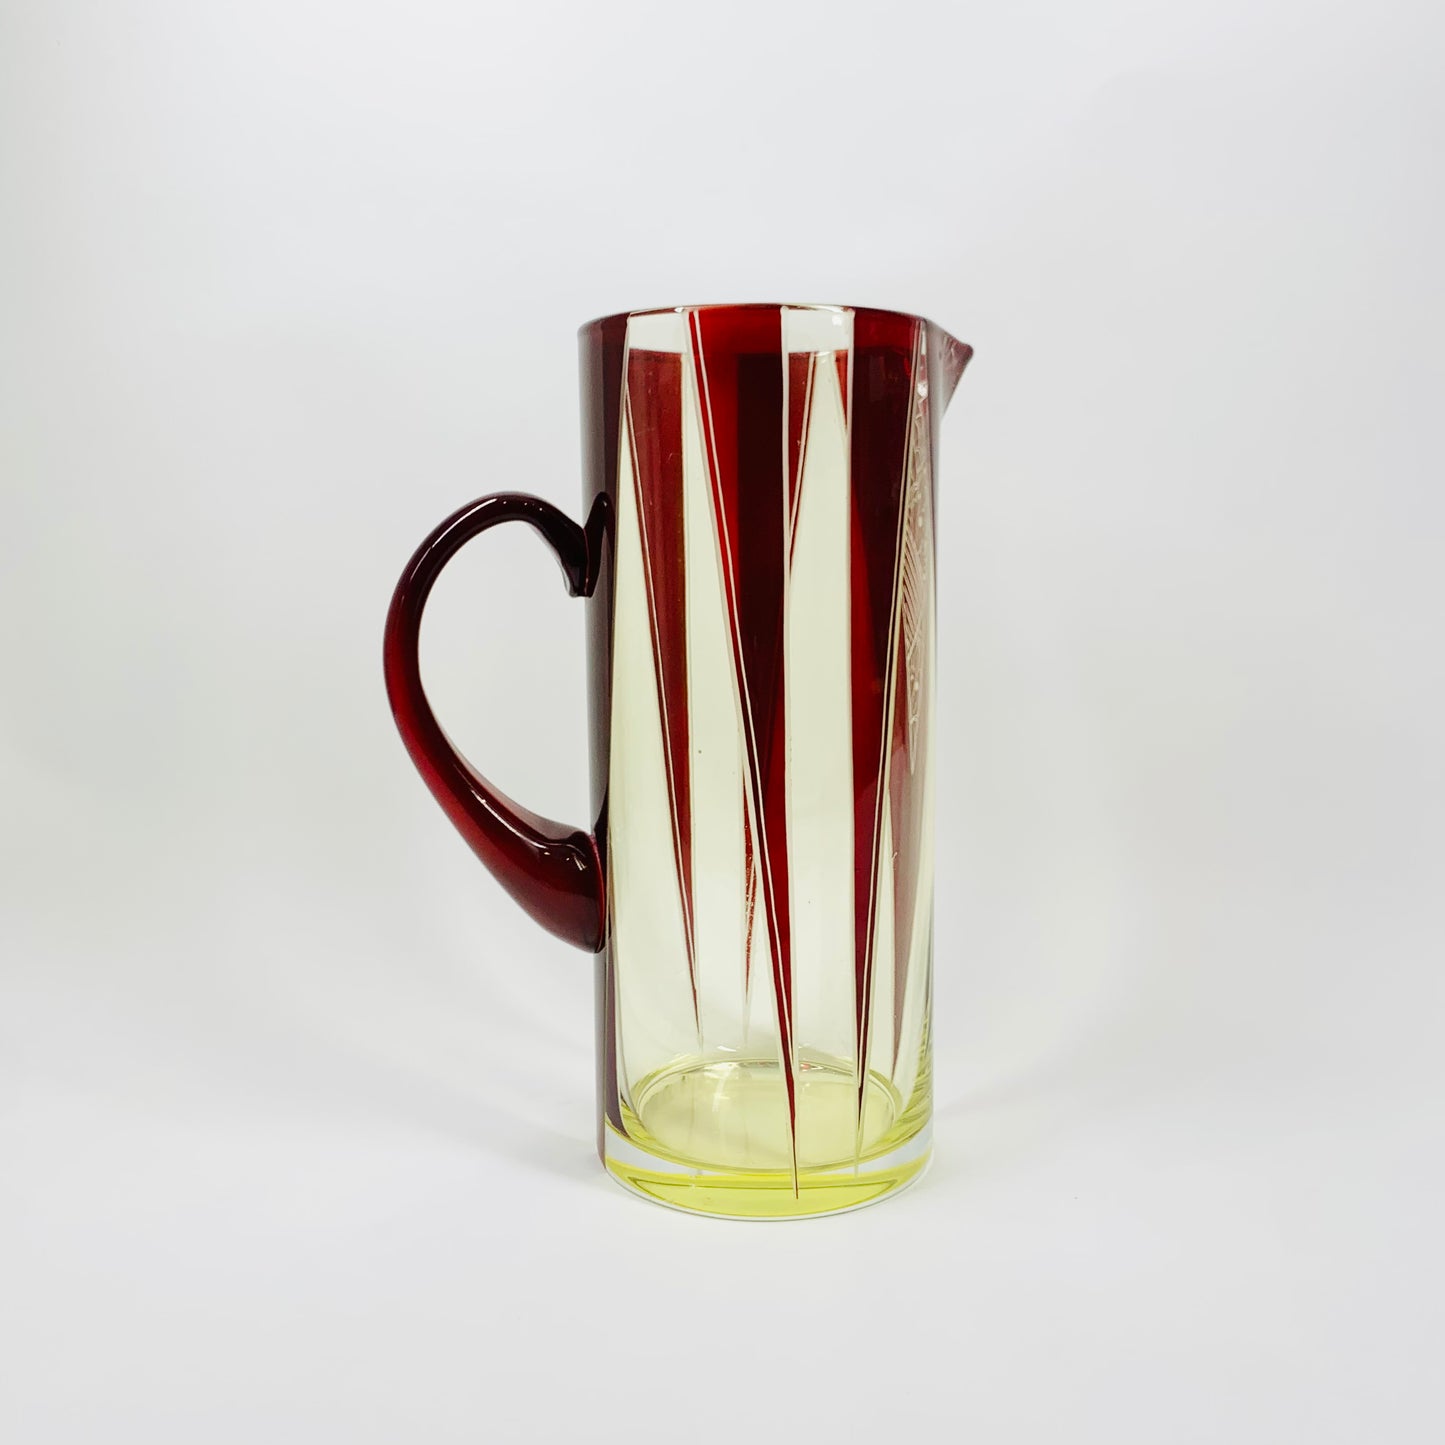 Extremely extremely rare antique Art Deco ruby enamel and citrine glass jug and matching wine glasses set by Karl Palda